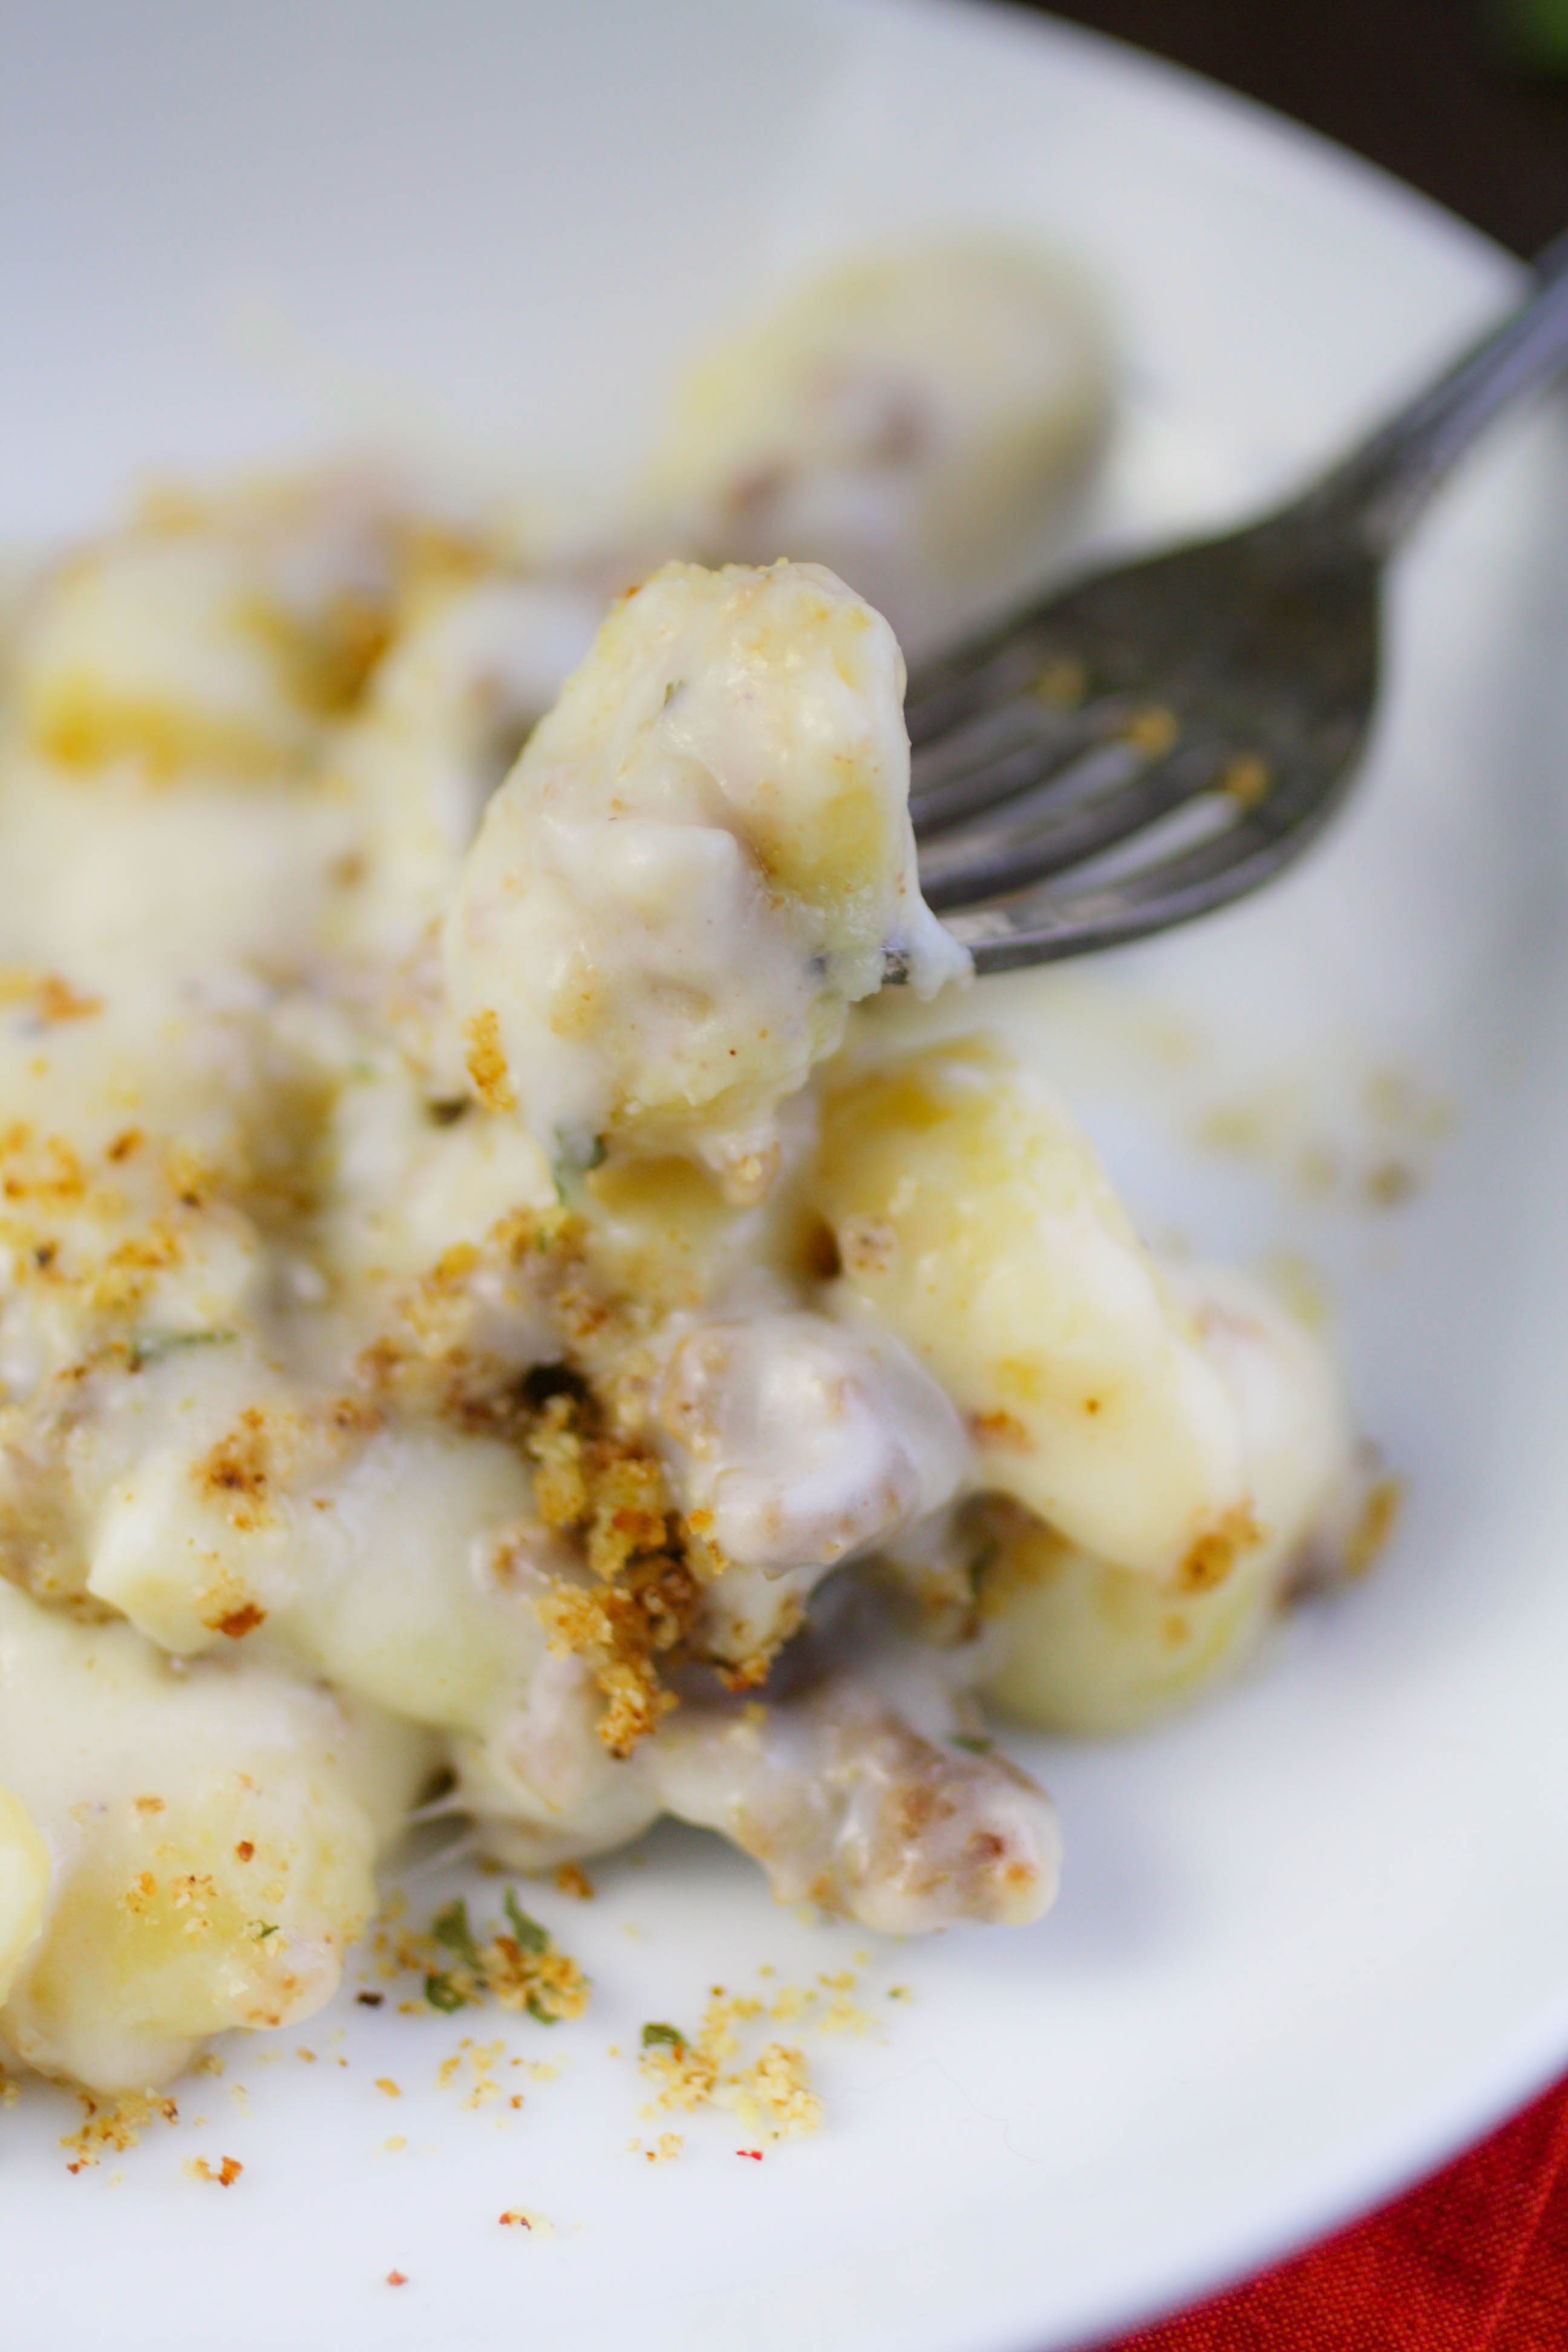 Dig into this rich Creamy Sausage Gnocchi & Cheese. You'll love the heartiness and comfort of Creamy Sausage Gnocchi & Cheese. 